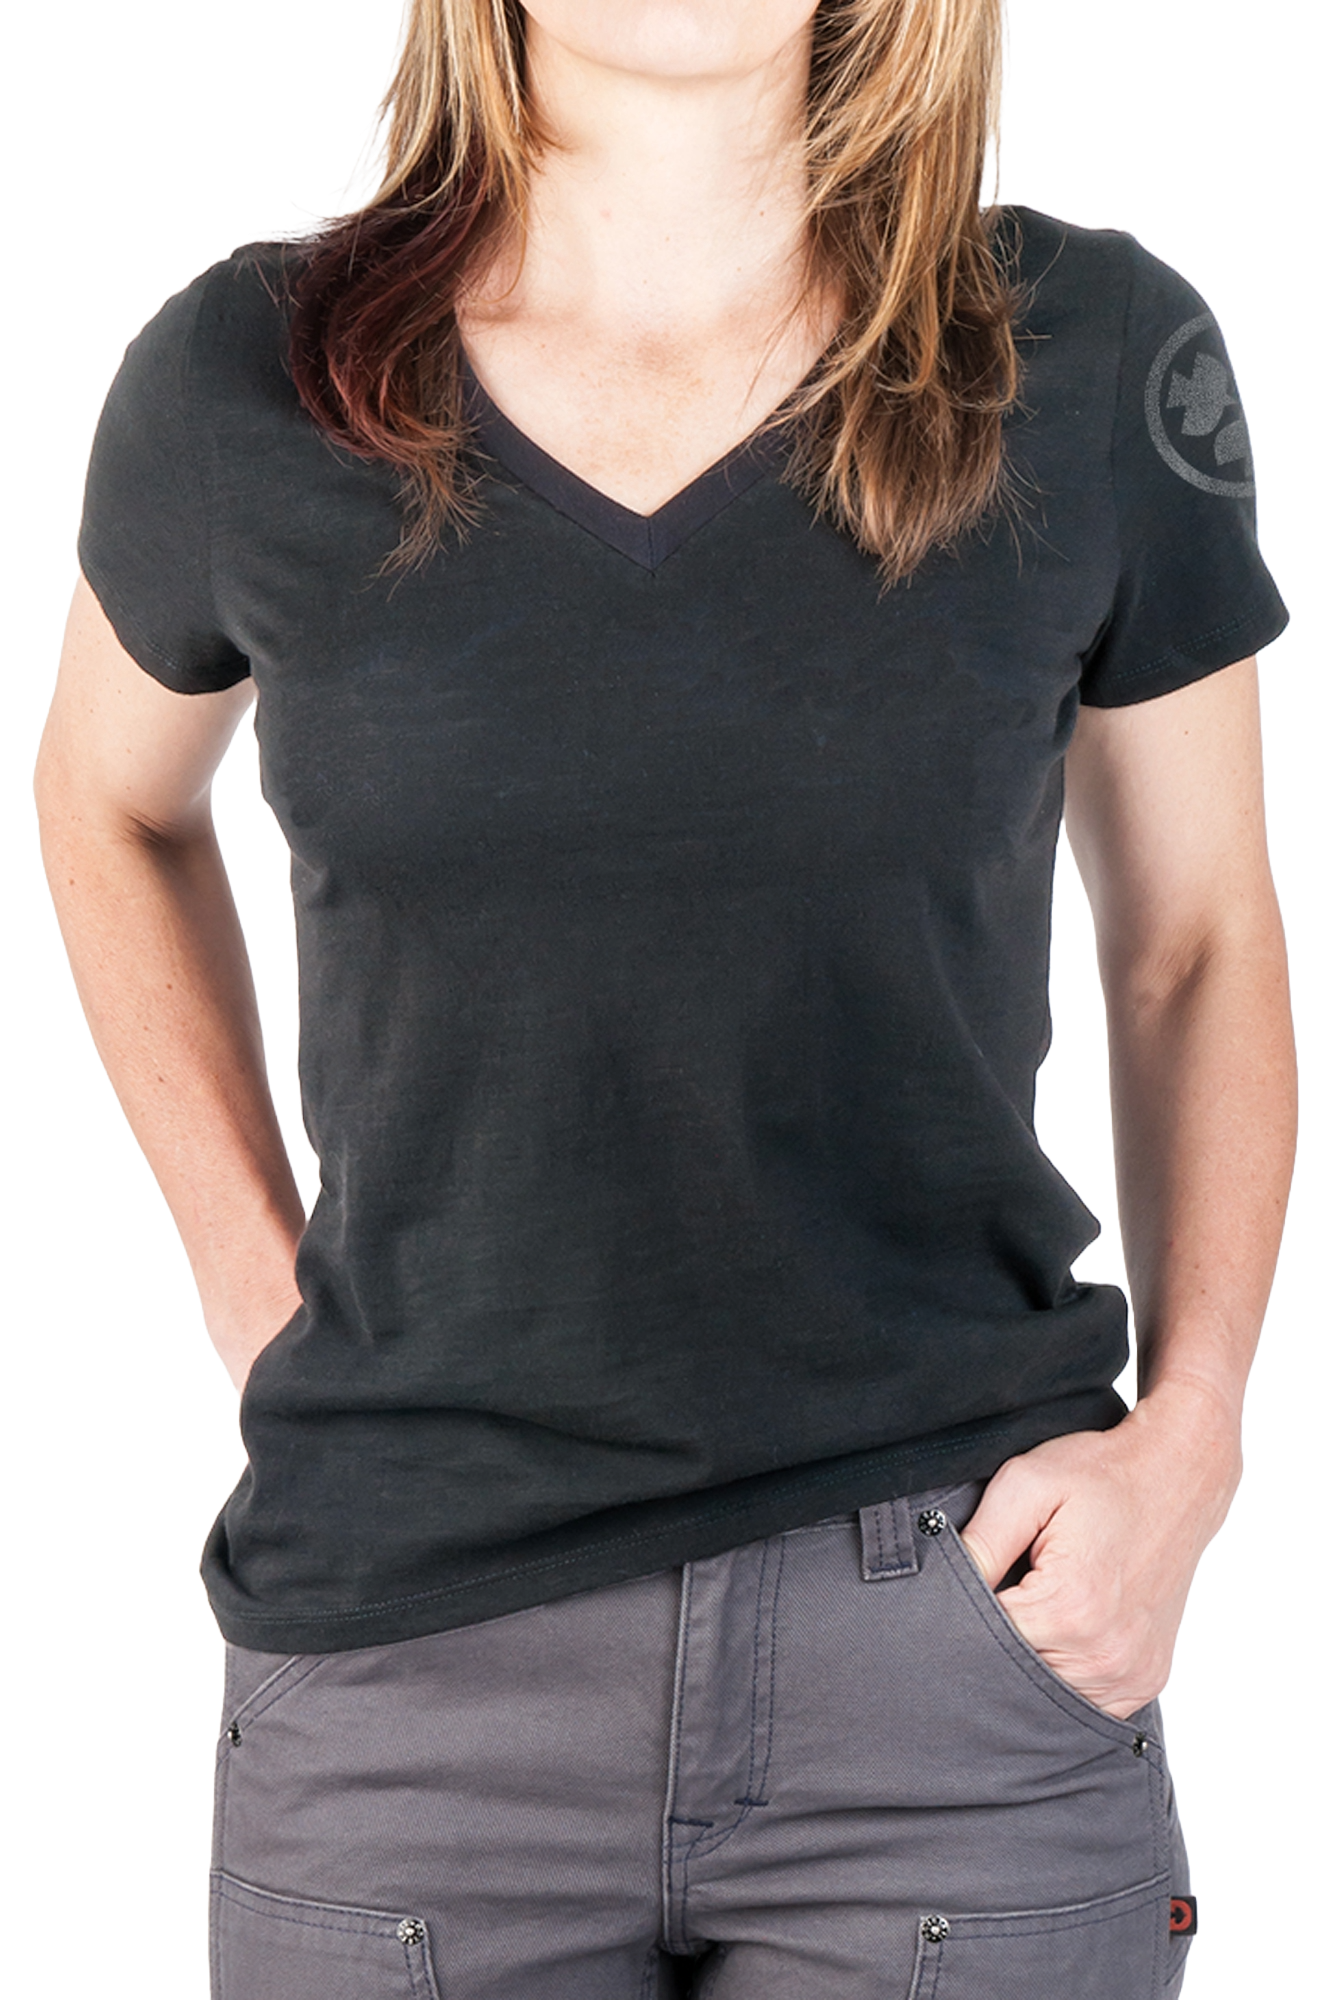 Dovetail V-Neck Solid Tee Shirt - Womens